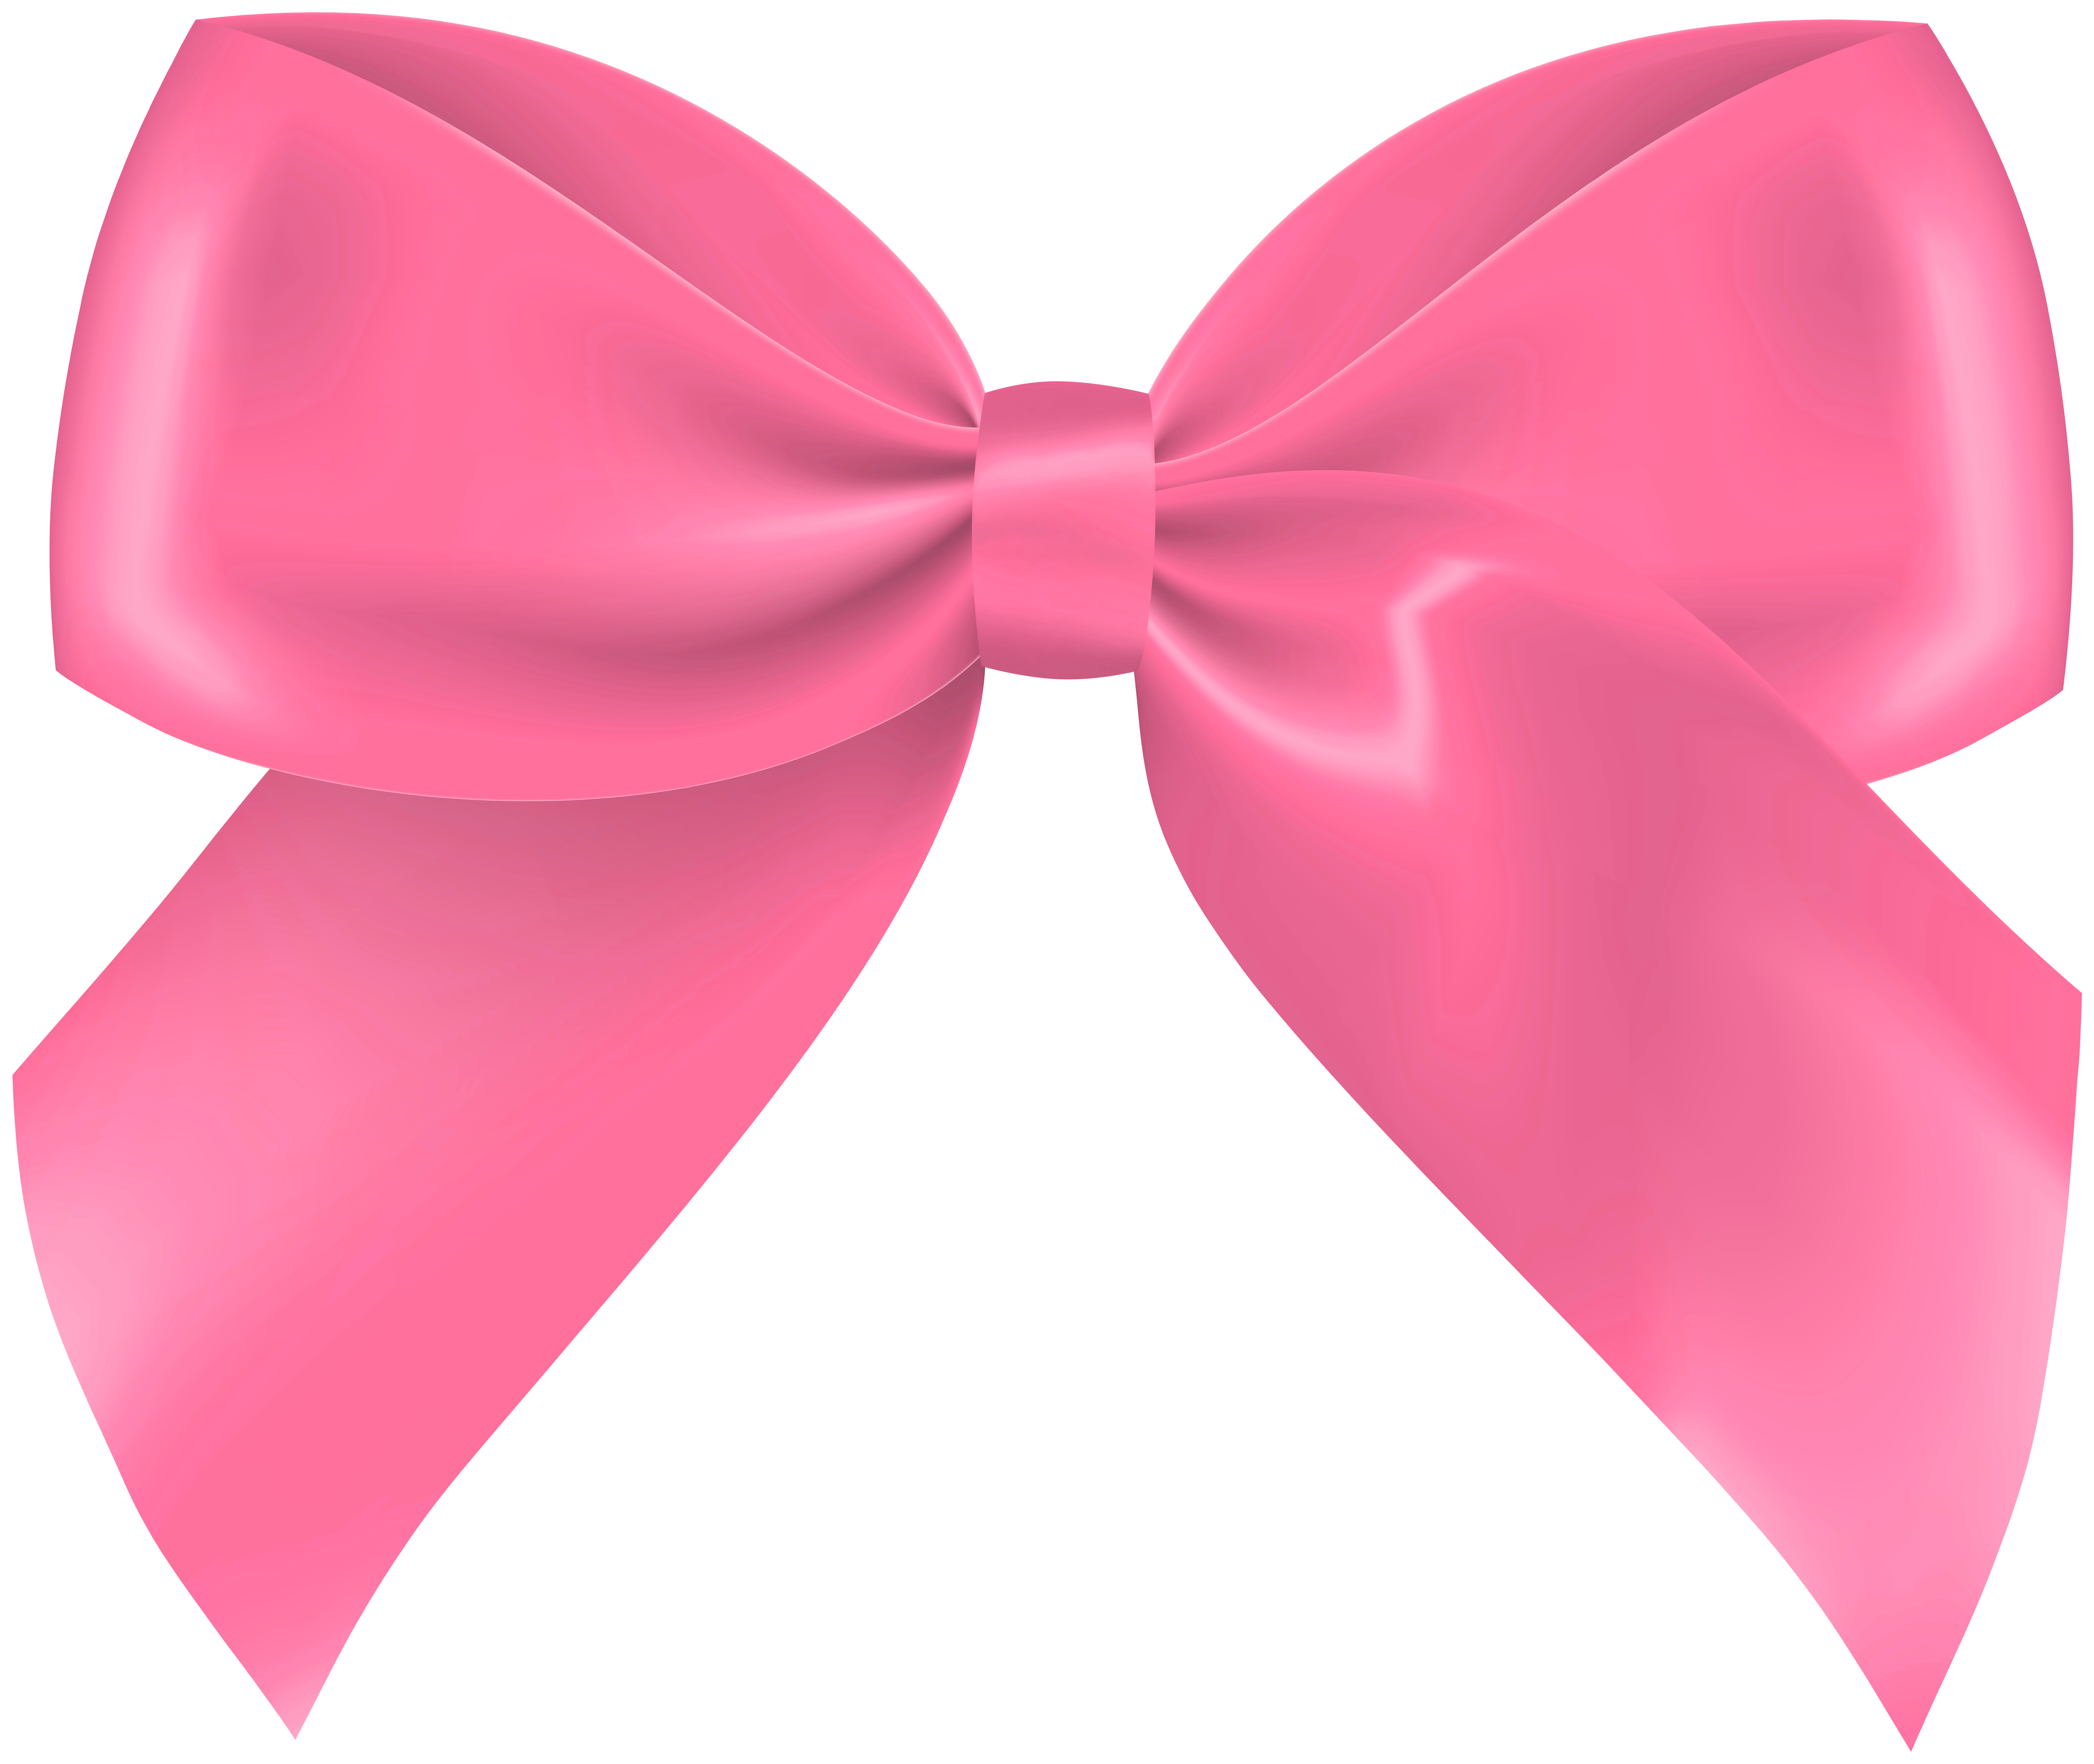 Pink Cute Bow PNG Clipart​  Gallery Yopriceville - High-Quality Free  Images and Transparent PNG Clipart